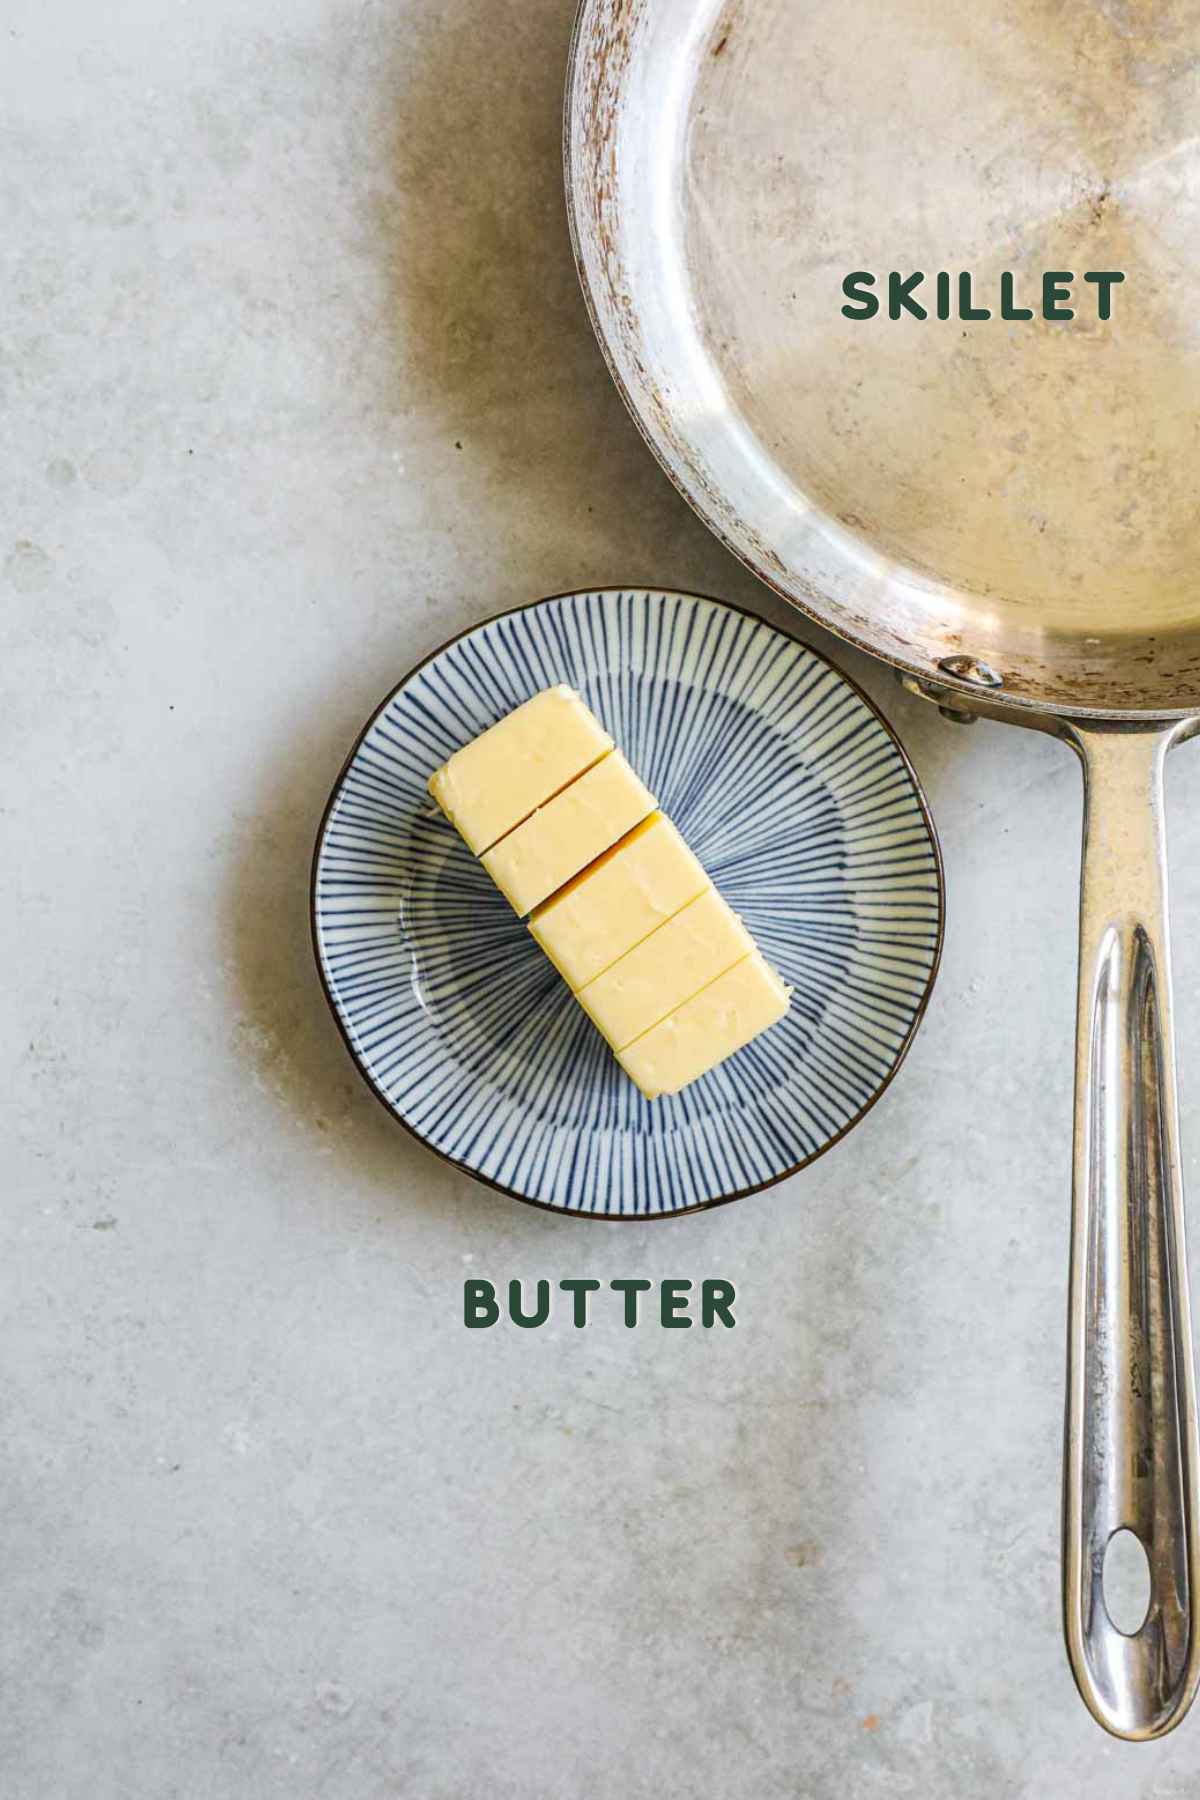 Ingredients to make browned butter, including high-quality butter with a higher fat content and a skillet.